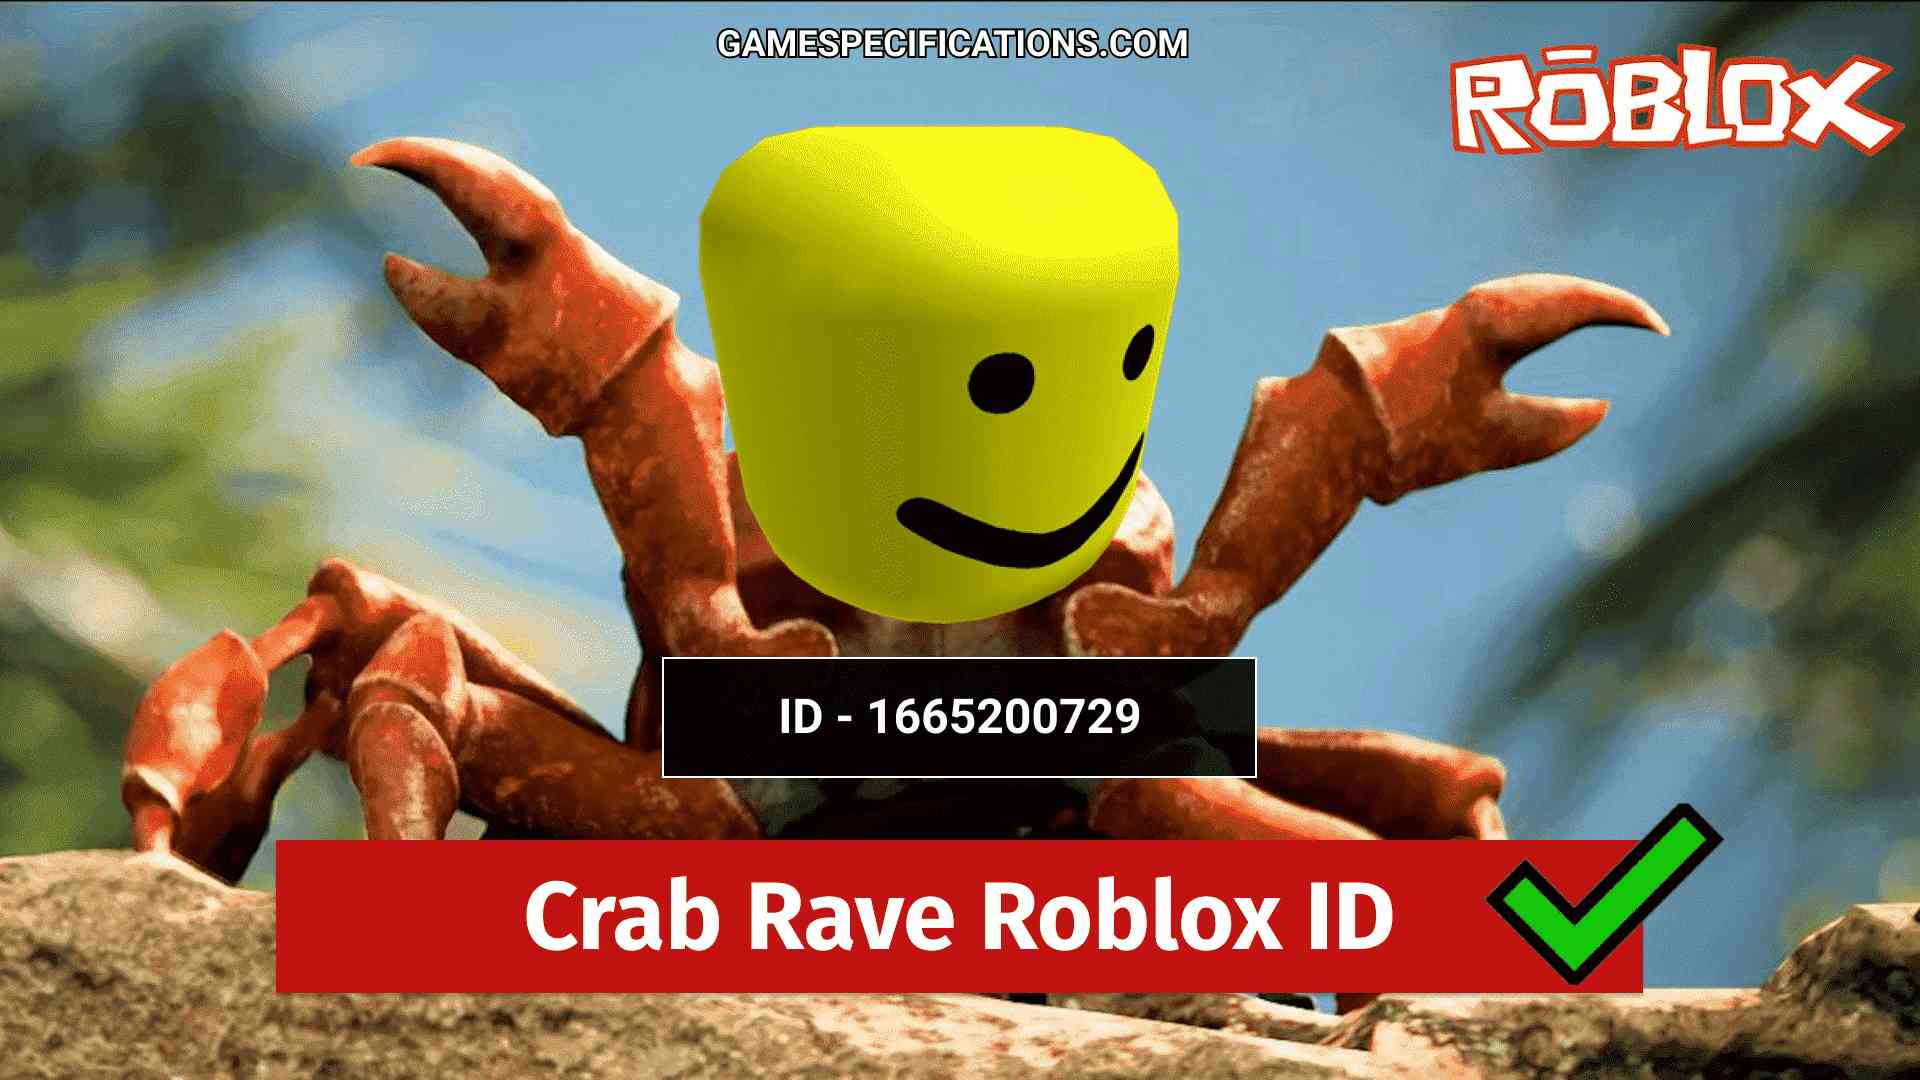 10 Best Crab Rave Roblox Id Codes Parody Remix Included Game Specifications - roblox smile id